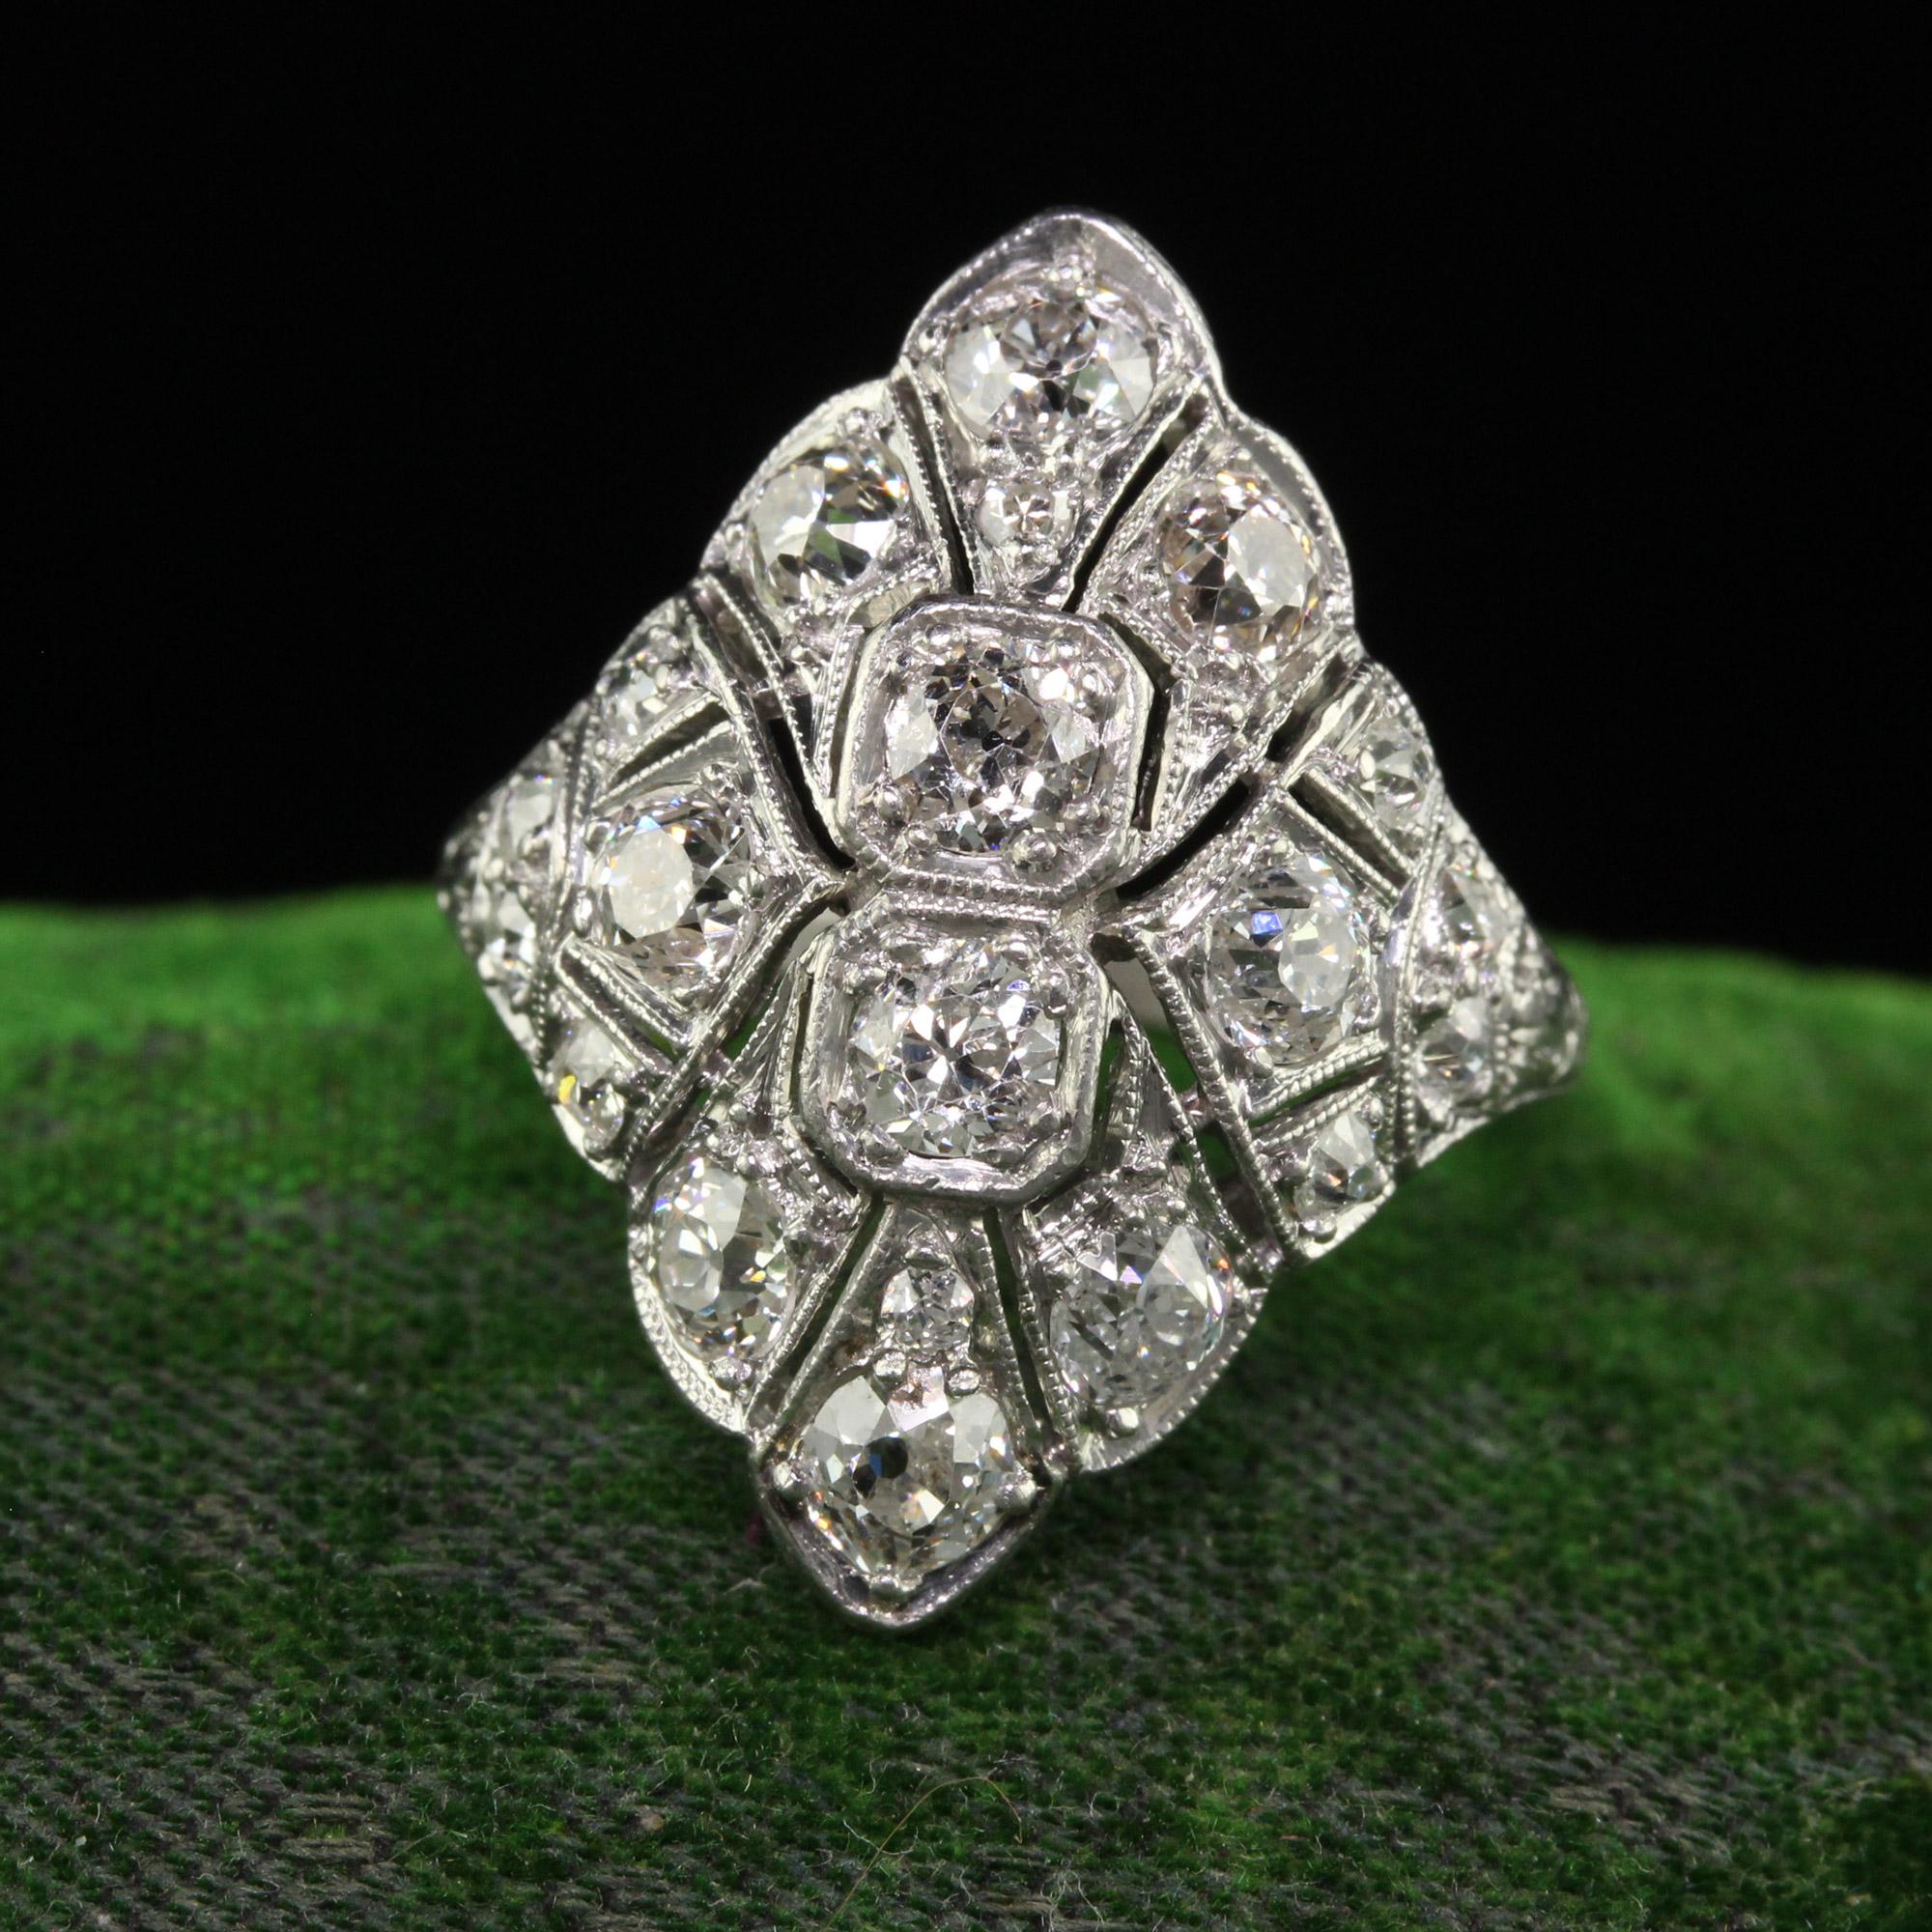 Beautiful Antique Art Deco Platinum Old European Diamond Filigree Shield Ring. This incredible art deco diamond shield ring is crafted in platinum. The top of the ring is set with gorgeous old European cut diamonds in a beautiful Art Deco mounting